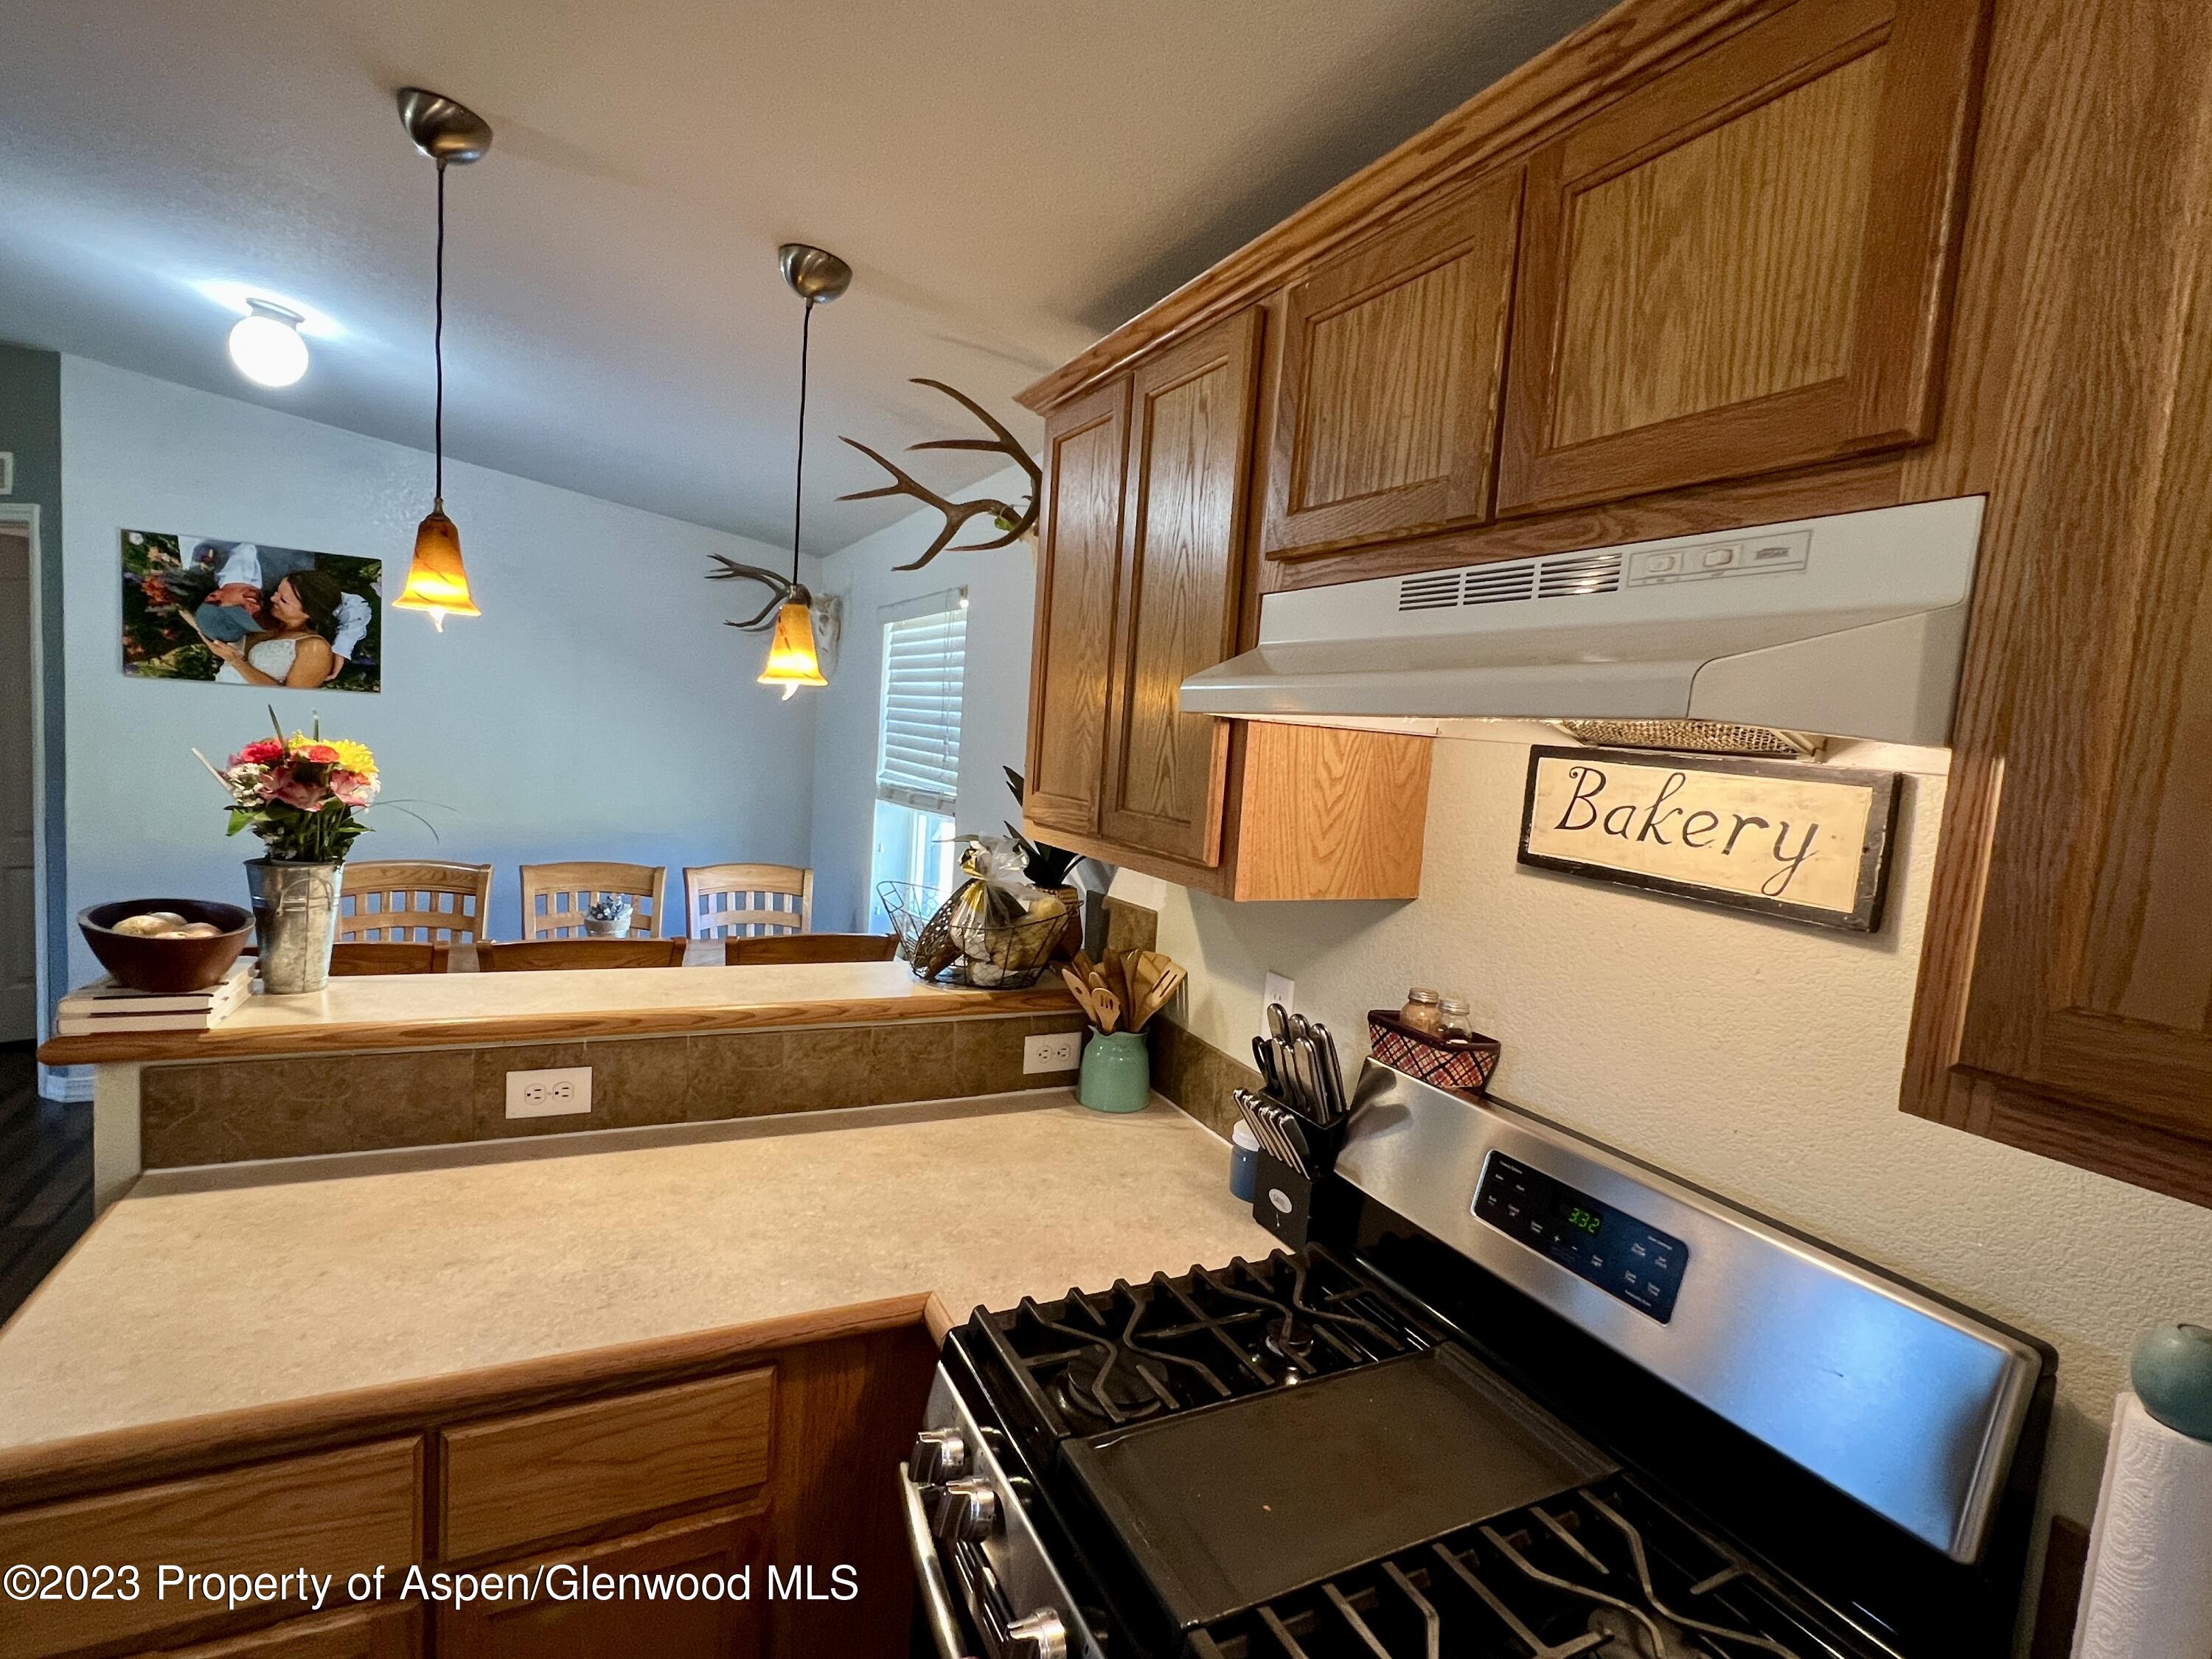 a room with stainless steel appliances kitchen island a stove and a refrigerator